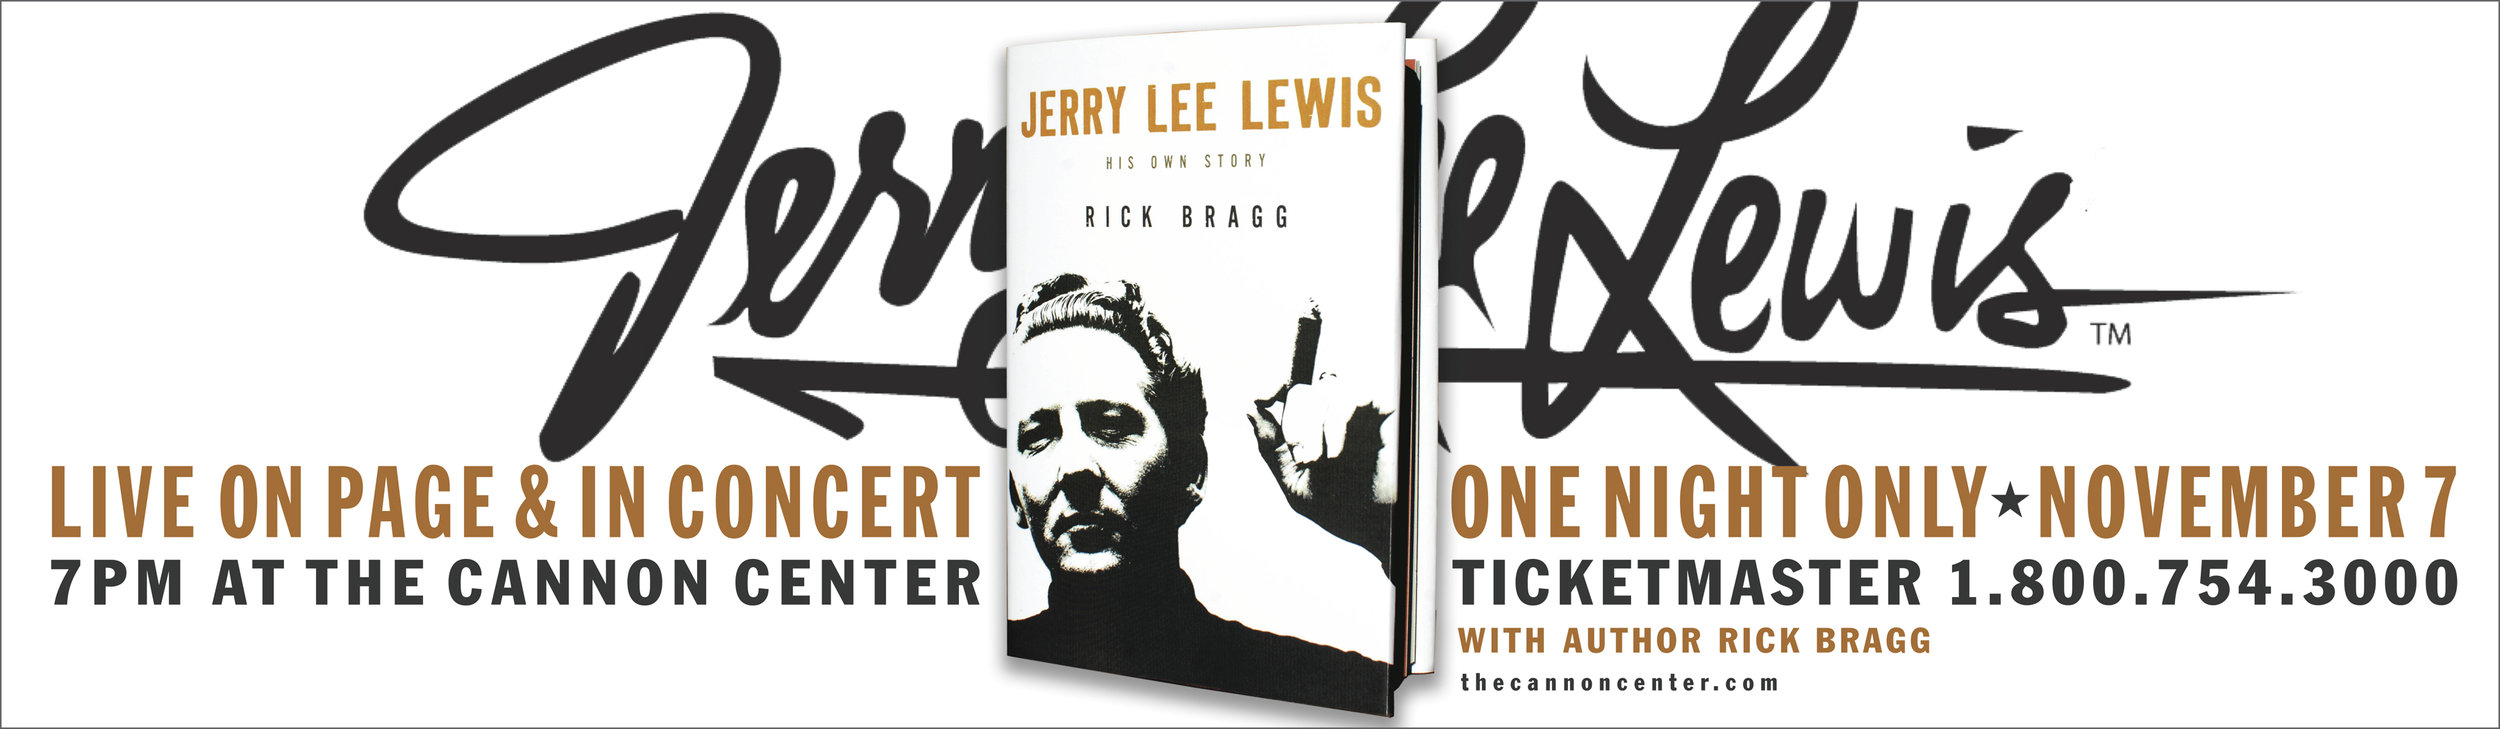  Jerry Lee Lewis and Rick Bragg book reading and concert  Cannon Center Memphis  Outdoor board and digital 2  Creative, copywriting and design by Chuck Mitchell  Photo courtesy JLL   